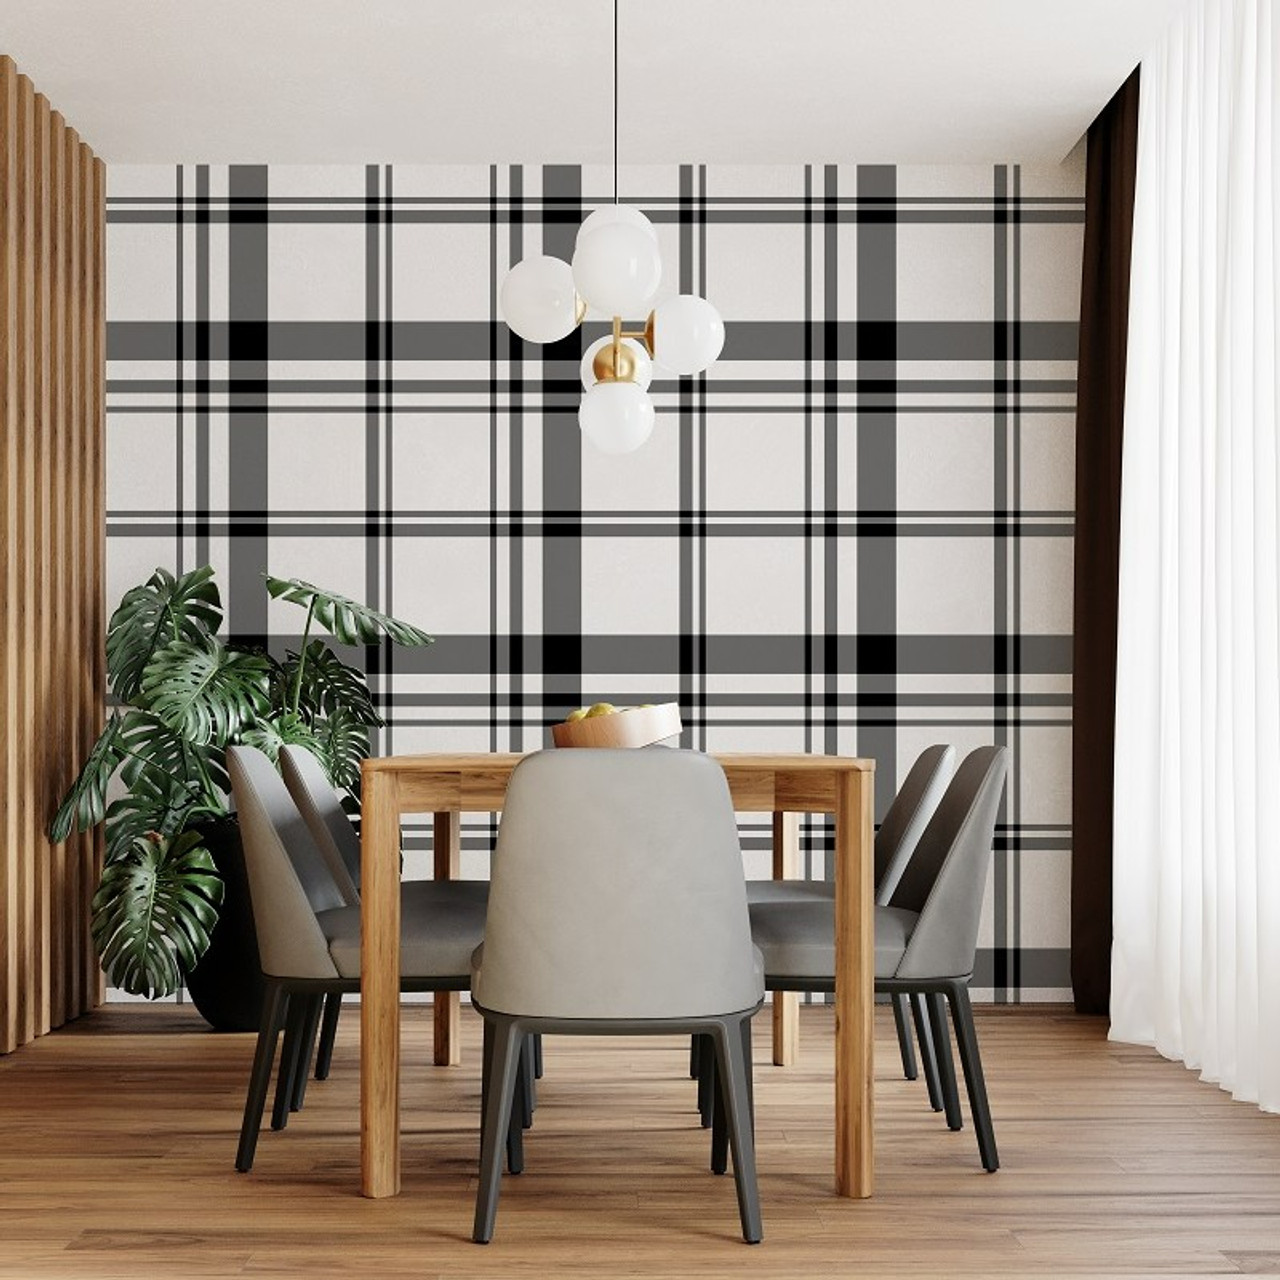 ApartmentFriendly Fix Opalhouse Designed With Jungalow Diskus Plaid Peel  and Stick Wallpaper  22 Bold Furniture and Decor Items Thatll Put a Smile  on Your Face  POPSUGAR Home Photo 4